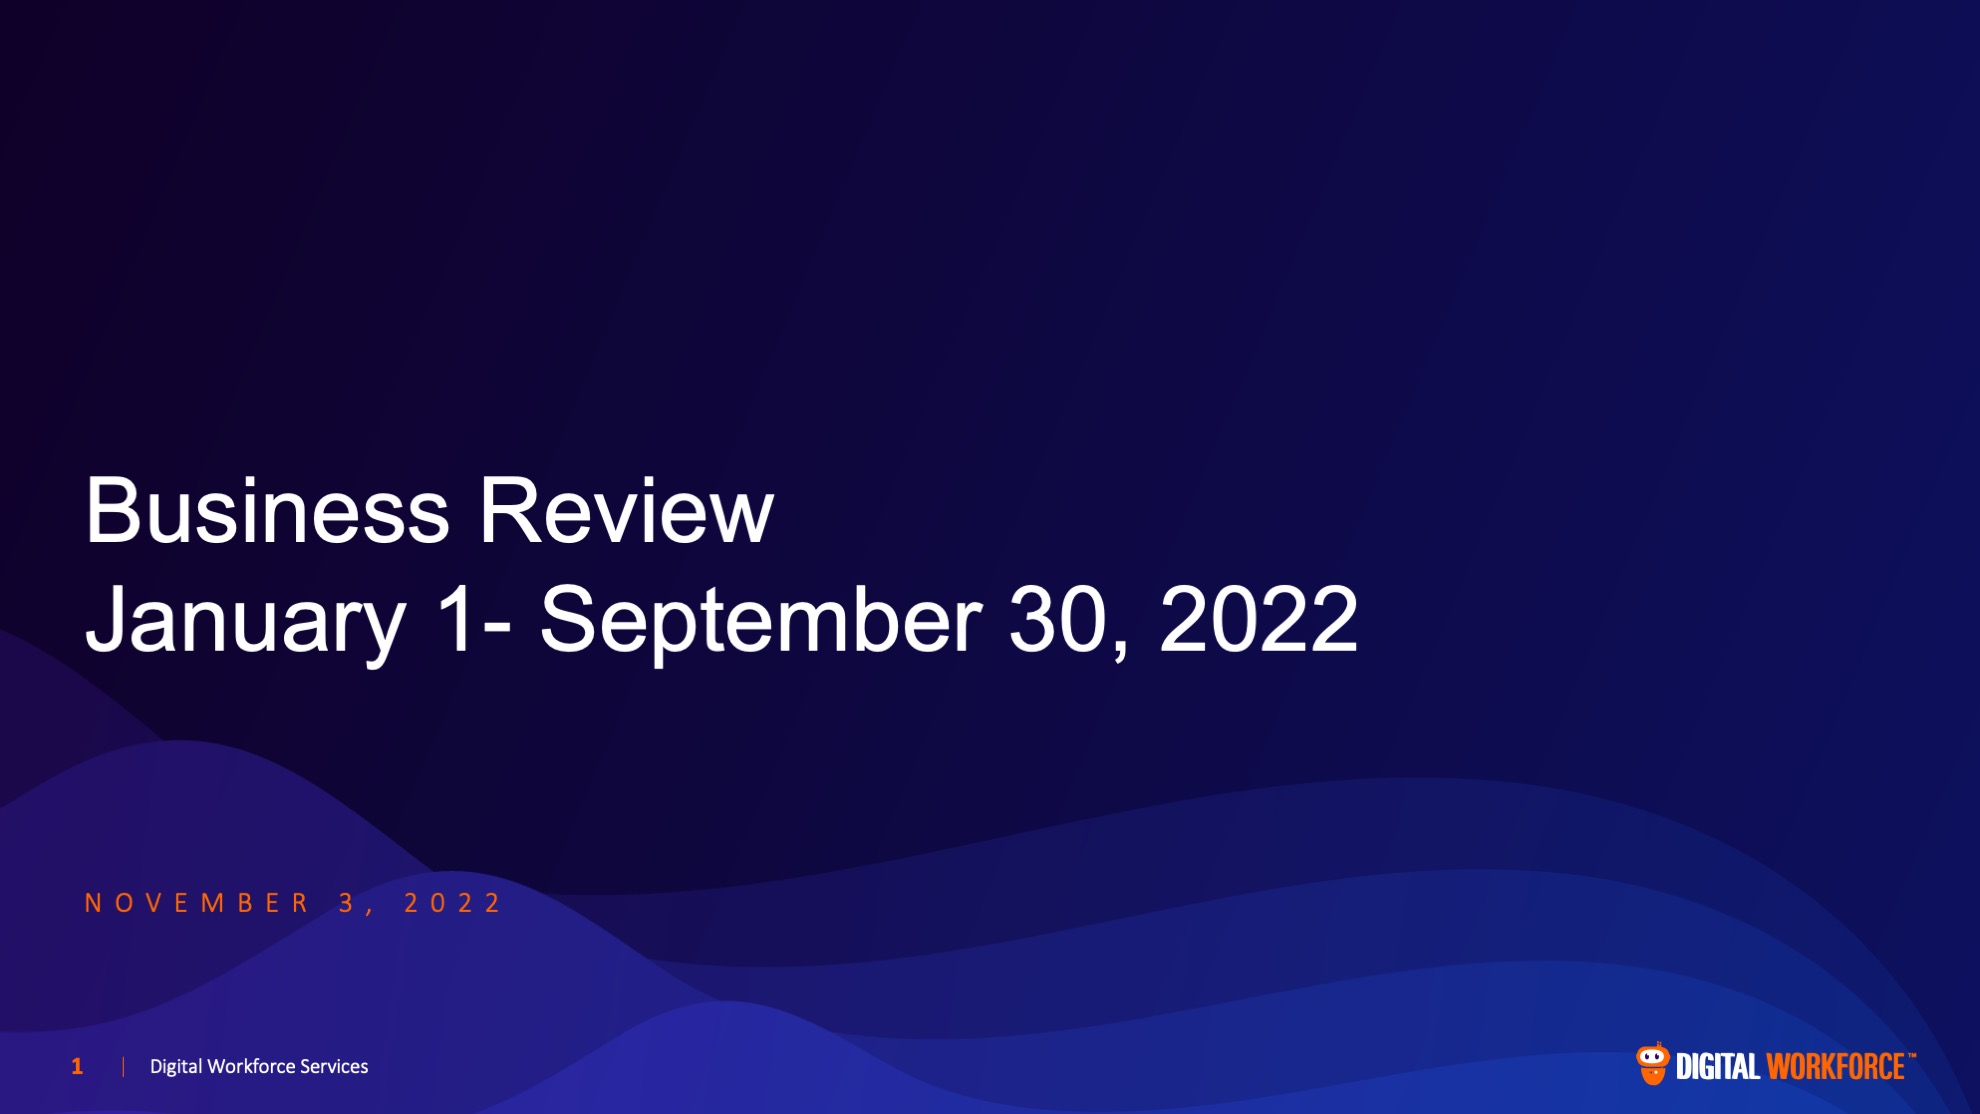 Business Review Q3 2022